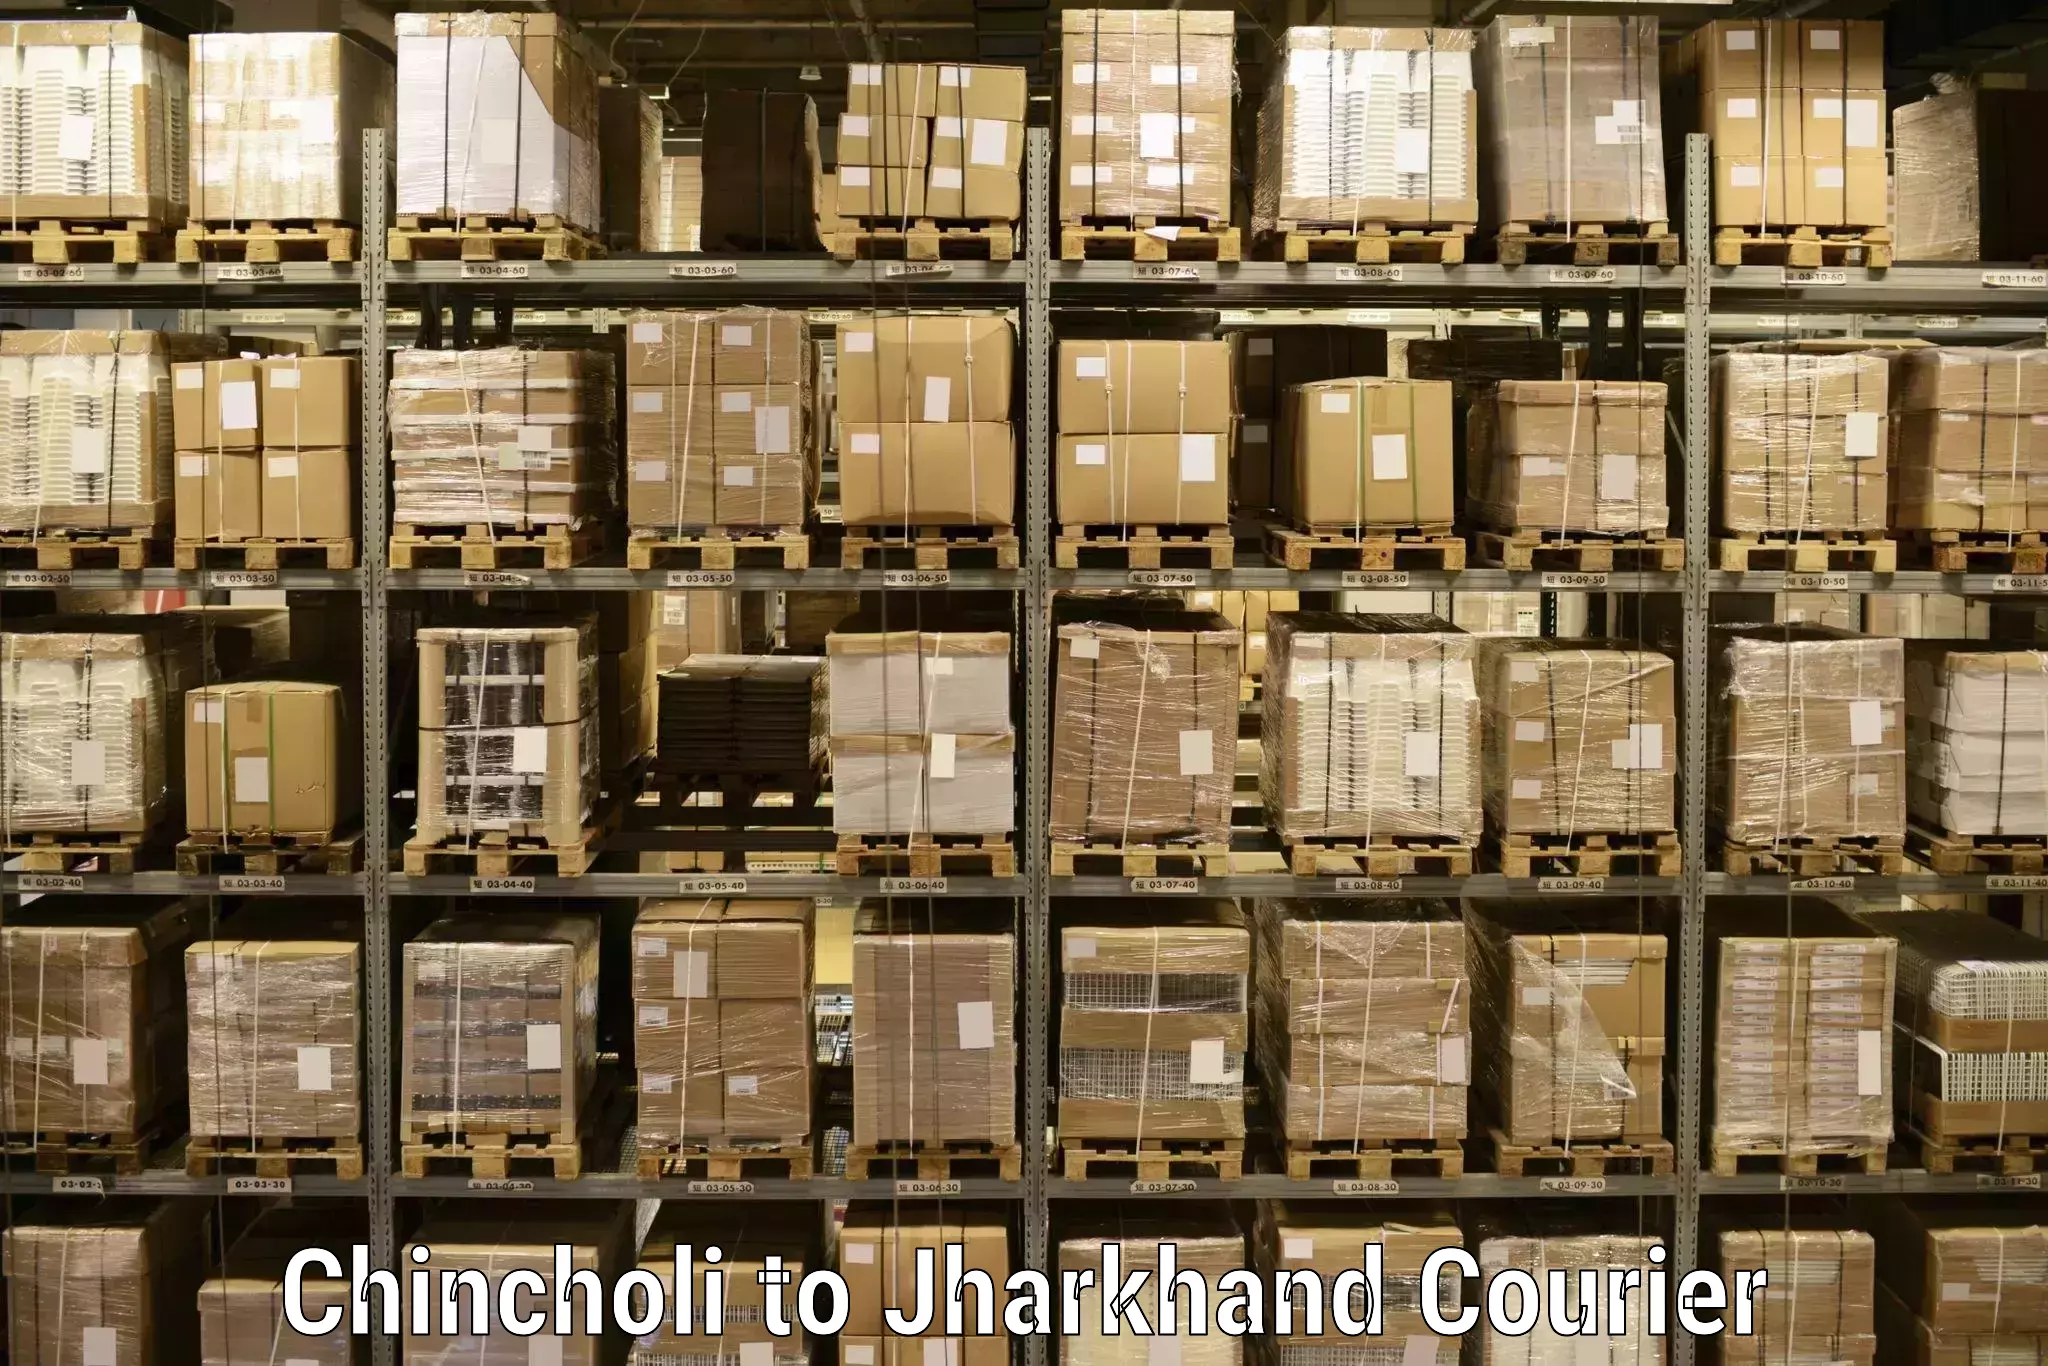 Multi-national courier services Chincholi to Bokaro Steel City